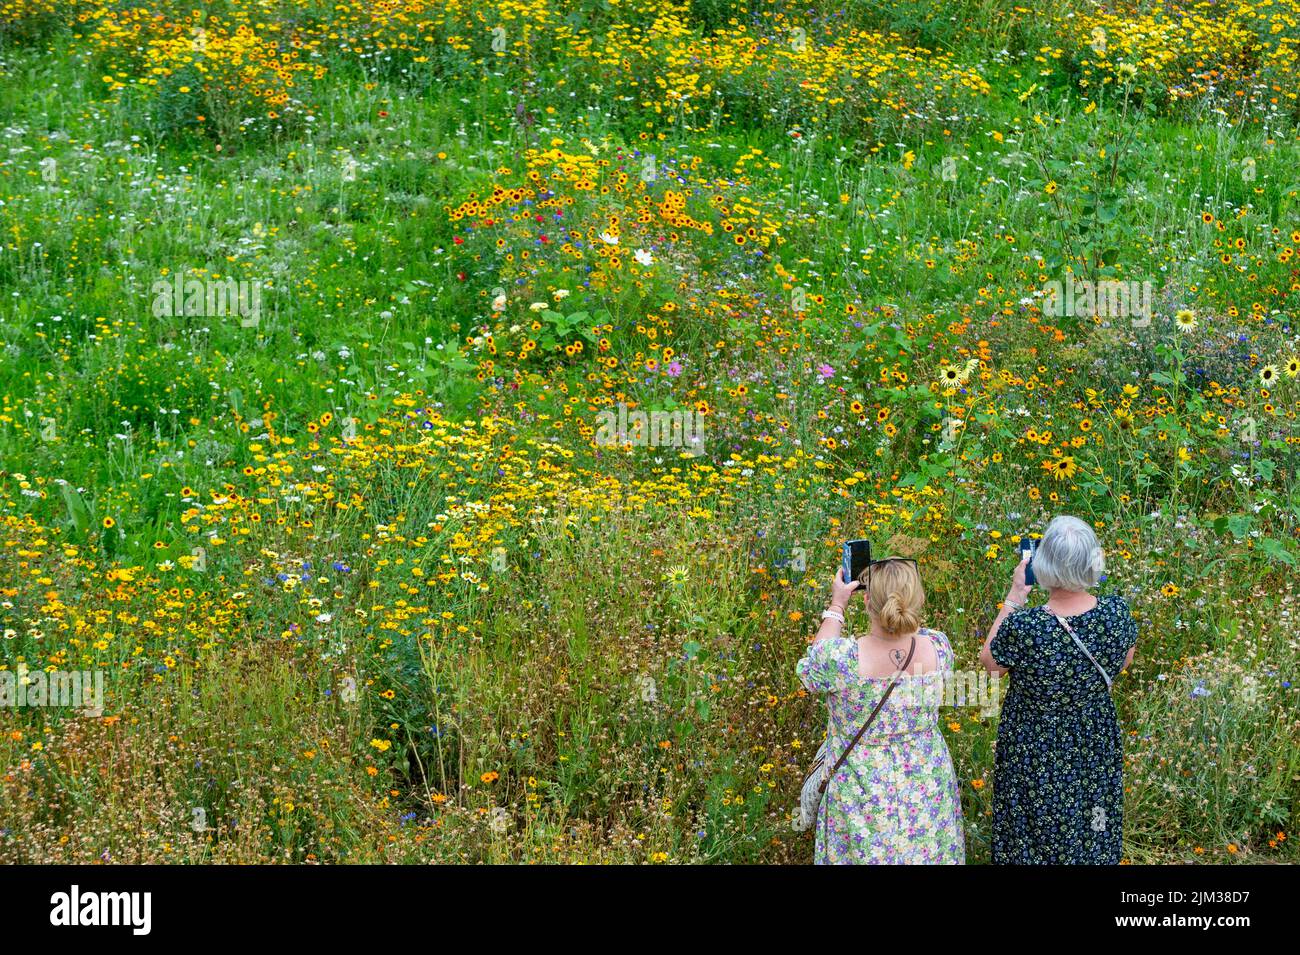 London, UK.  4 August 2022.  UK Weather - Visitors view Superbloom, a new permanent display of wildflowers in the moat of the Tower of London, grown from over 20 million seeds from 29 flower species which were sown to celebrate the Queen’s Platinum Jubilee. The flowers were chosen to attract a variety of pollinators to create a new biodiverse habitat.  As the current unusually dry conditions continue, with drought warnings in certain places, a modest sprinkler system is just managing to keep the flowers in bloom.  Credit: Stephen Chung / Alamy Live News Stock Photo